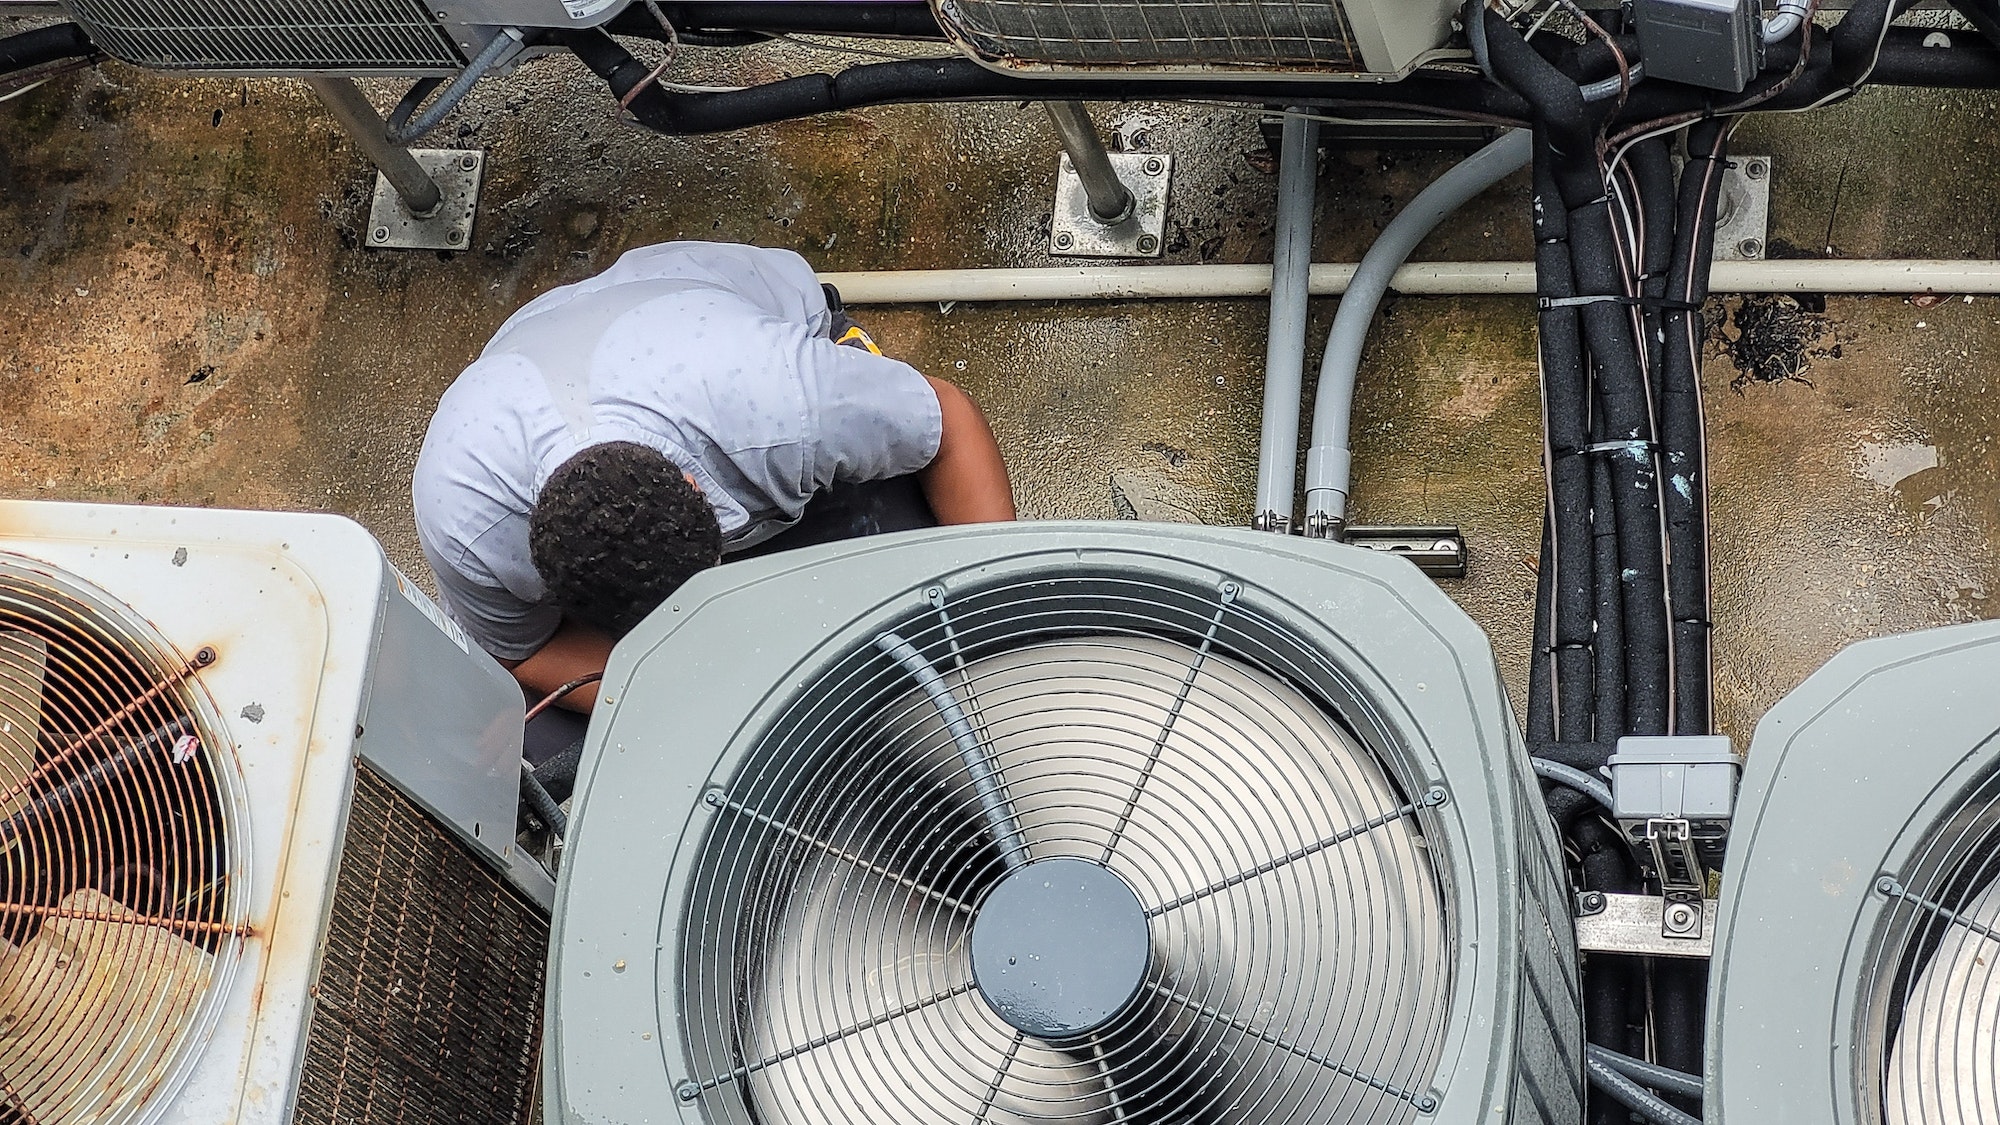 HVAC technician millennial is Latino working to maintain high efficiency heating and cool at beach.